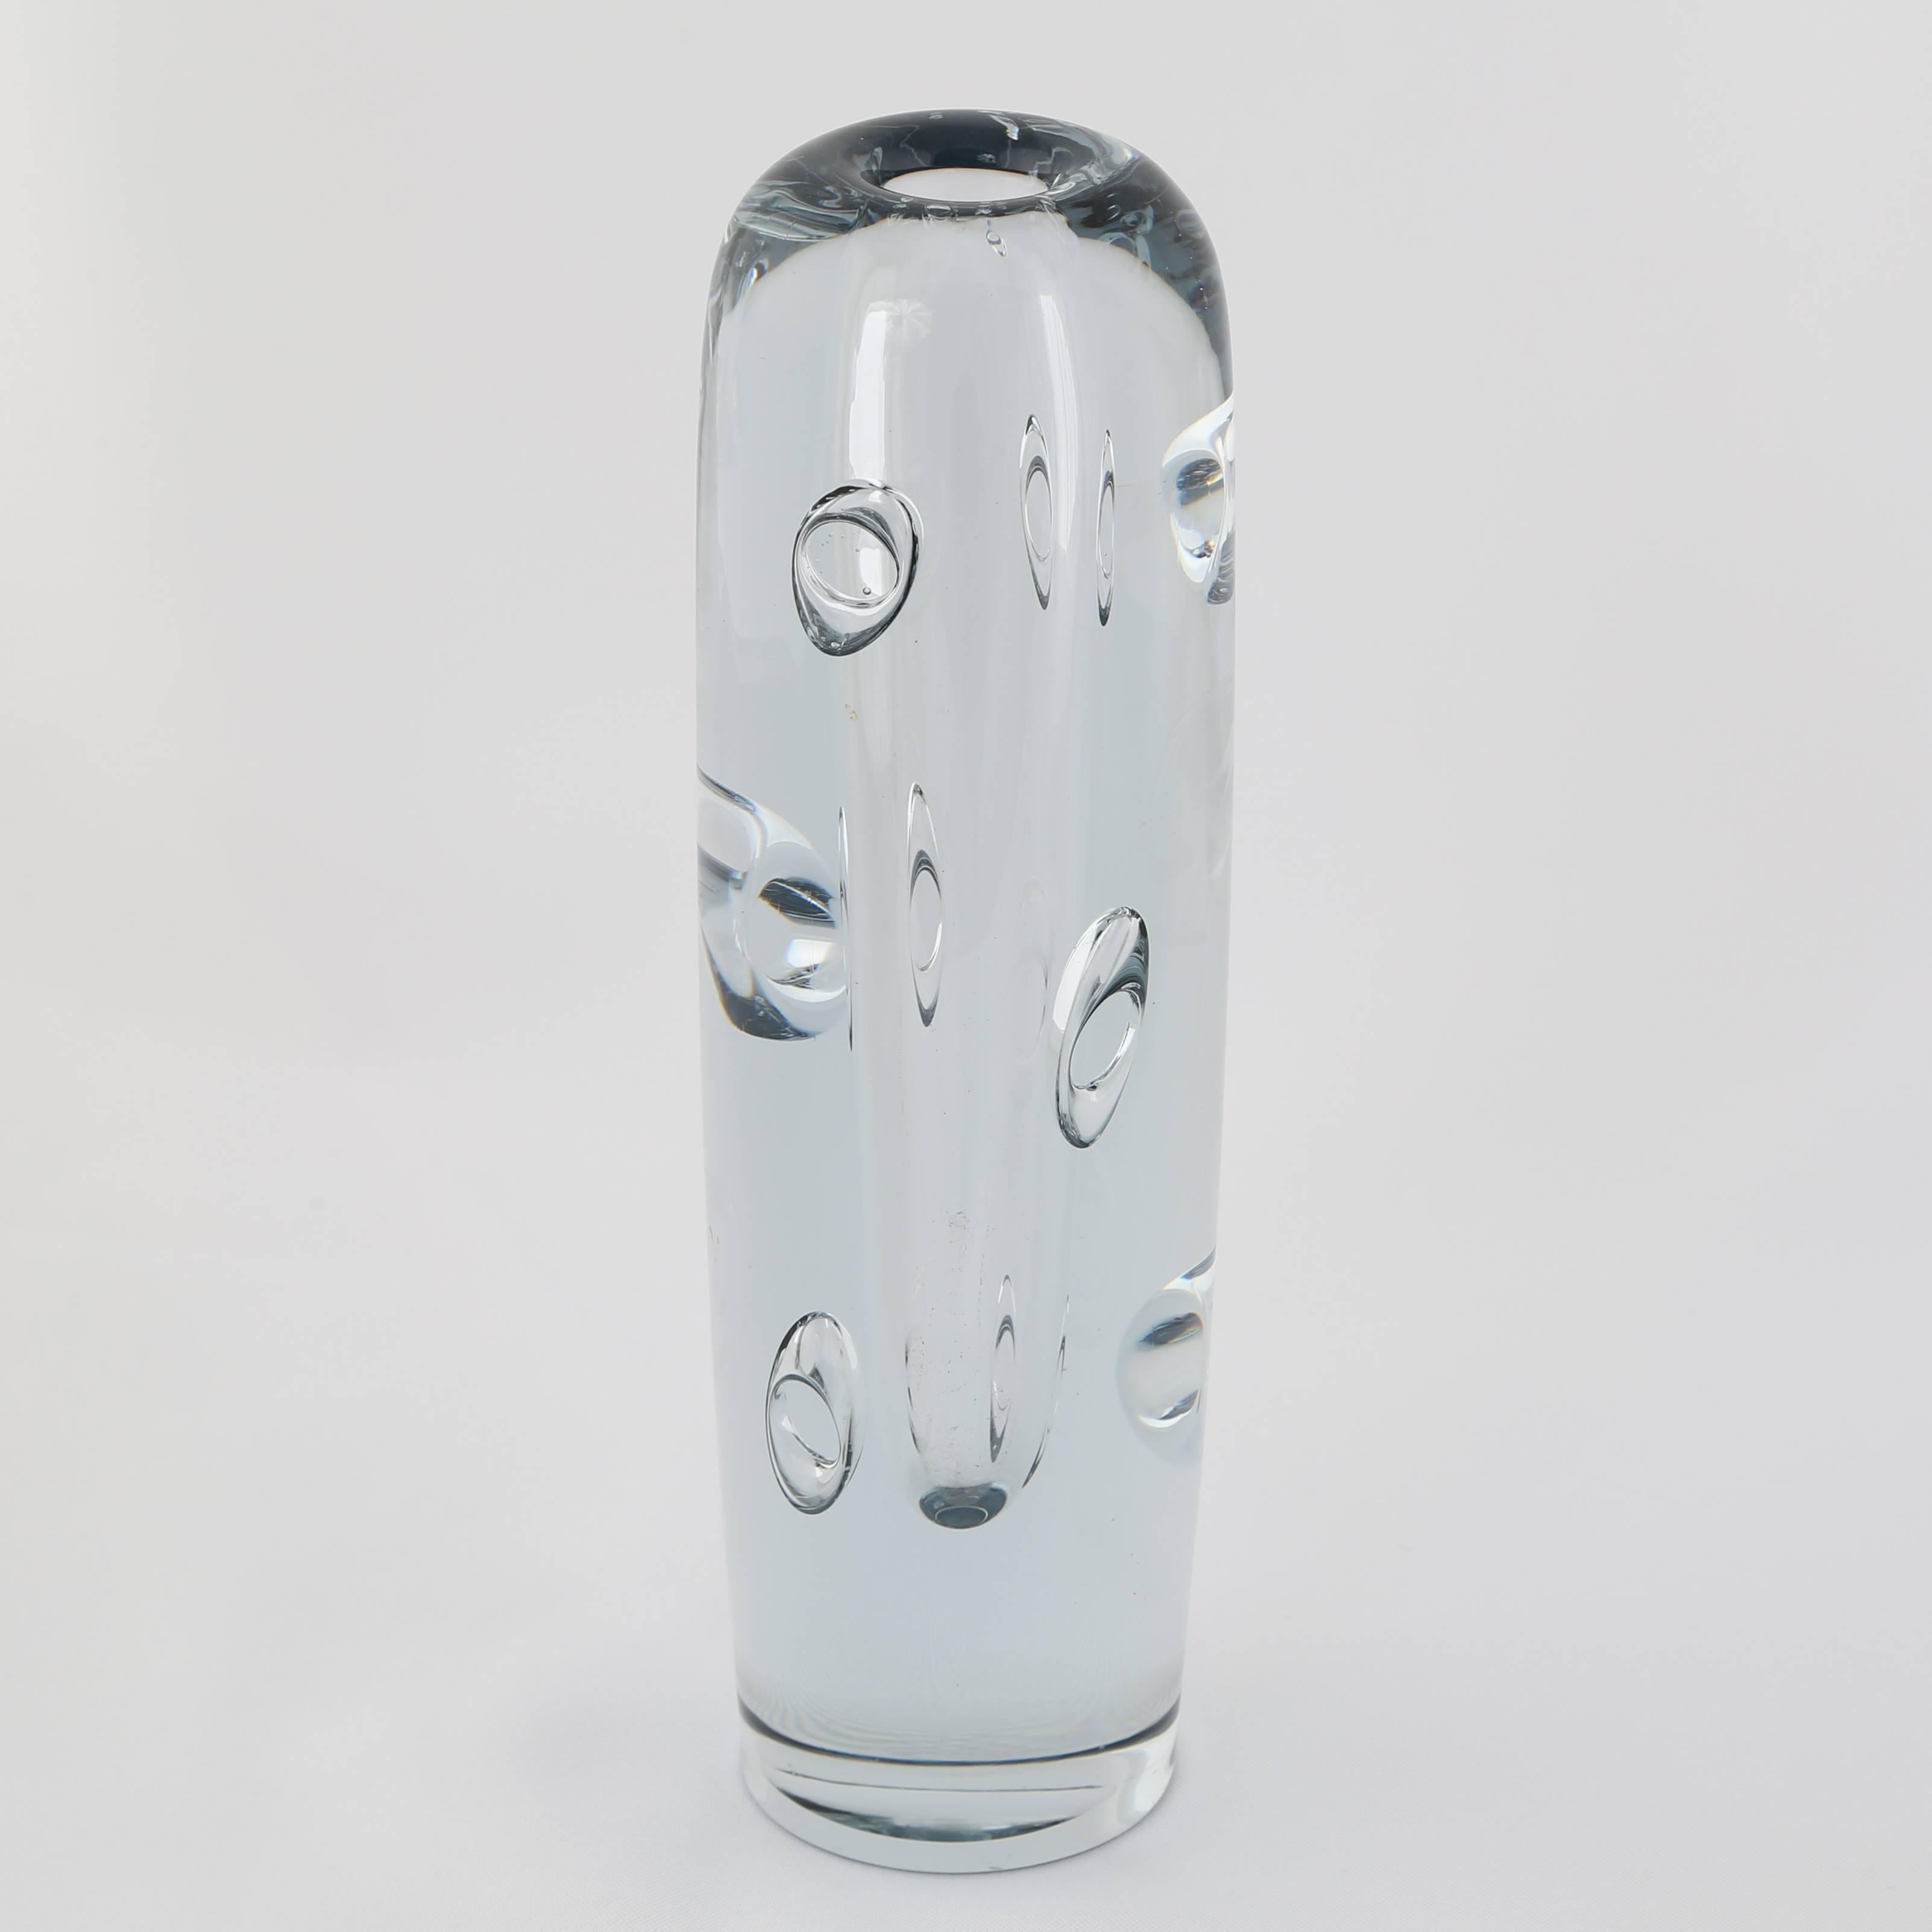 Substantial glass bud vase with amazing ring-shaped bubbles throughout in Strombergshyttan's signature blue-silver glass. Sweden, circa 1950s. Etched 